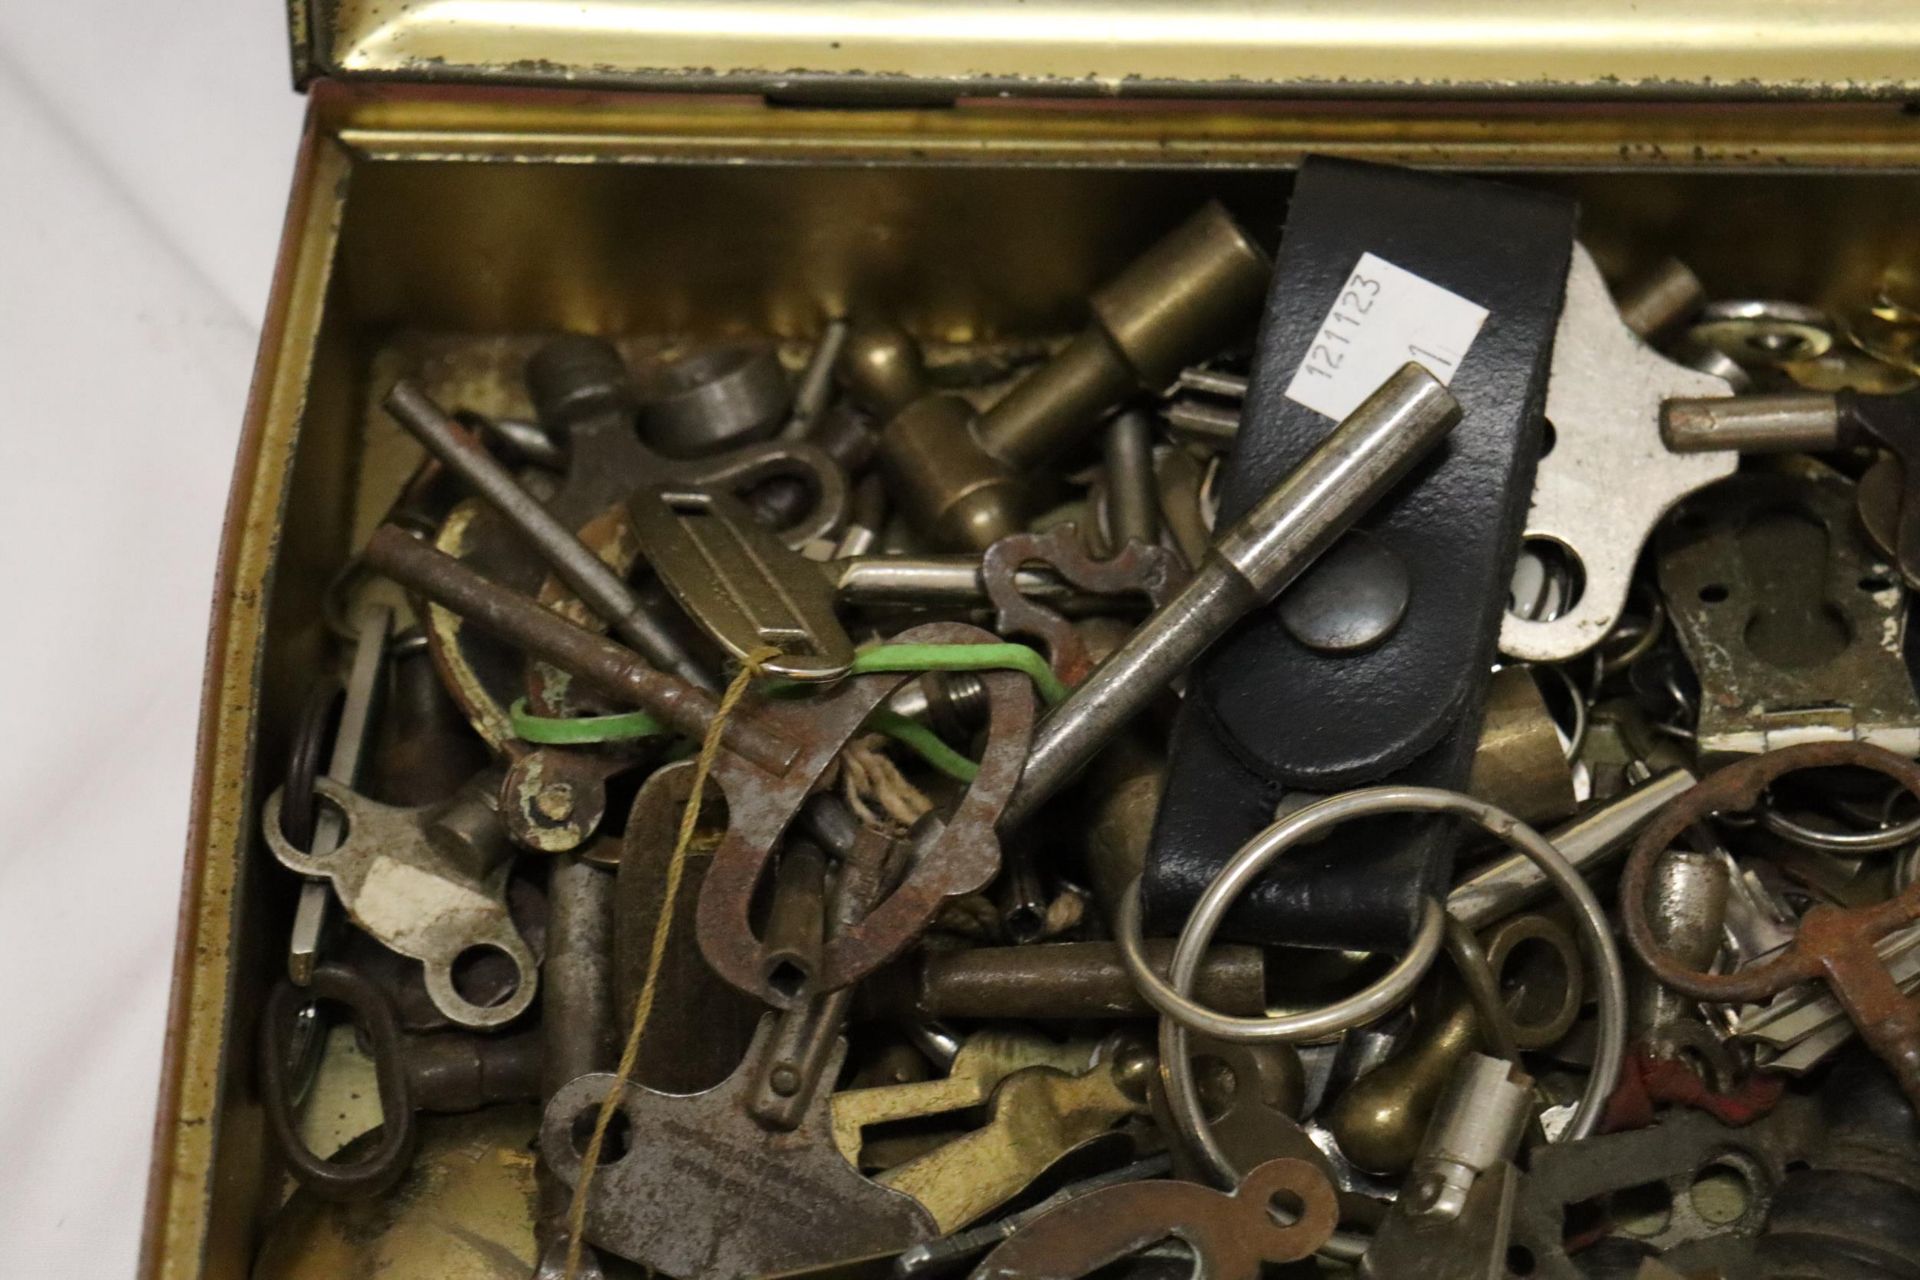 A LARGE QUANTITY OF VINTAGE FURNITURE AND CLOCK KEYS - Image 7 of 10